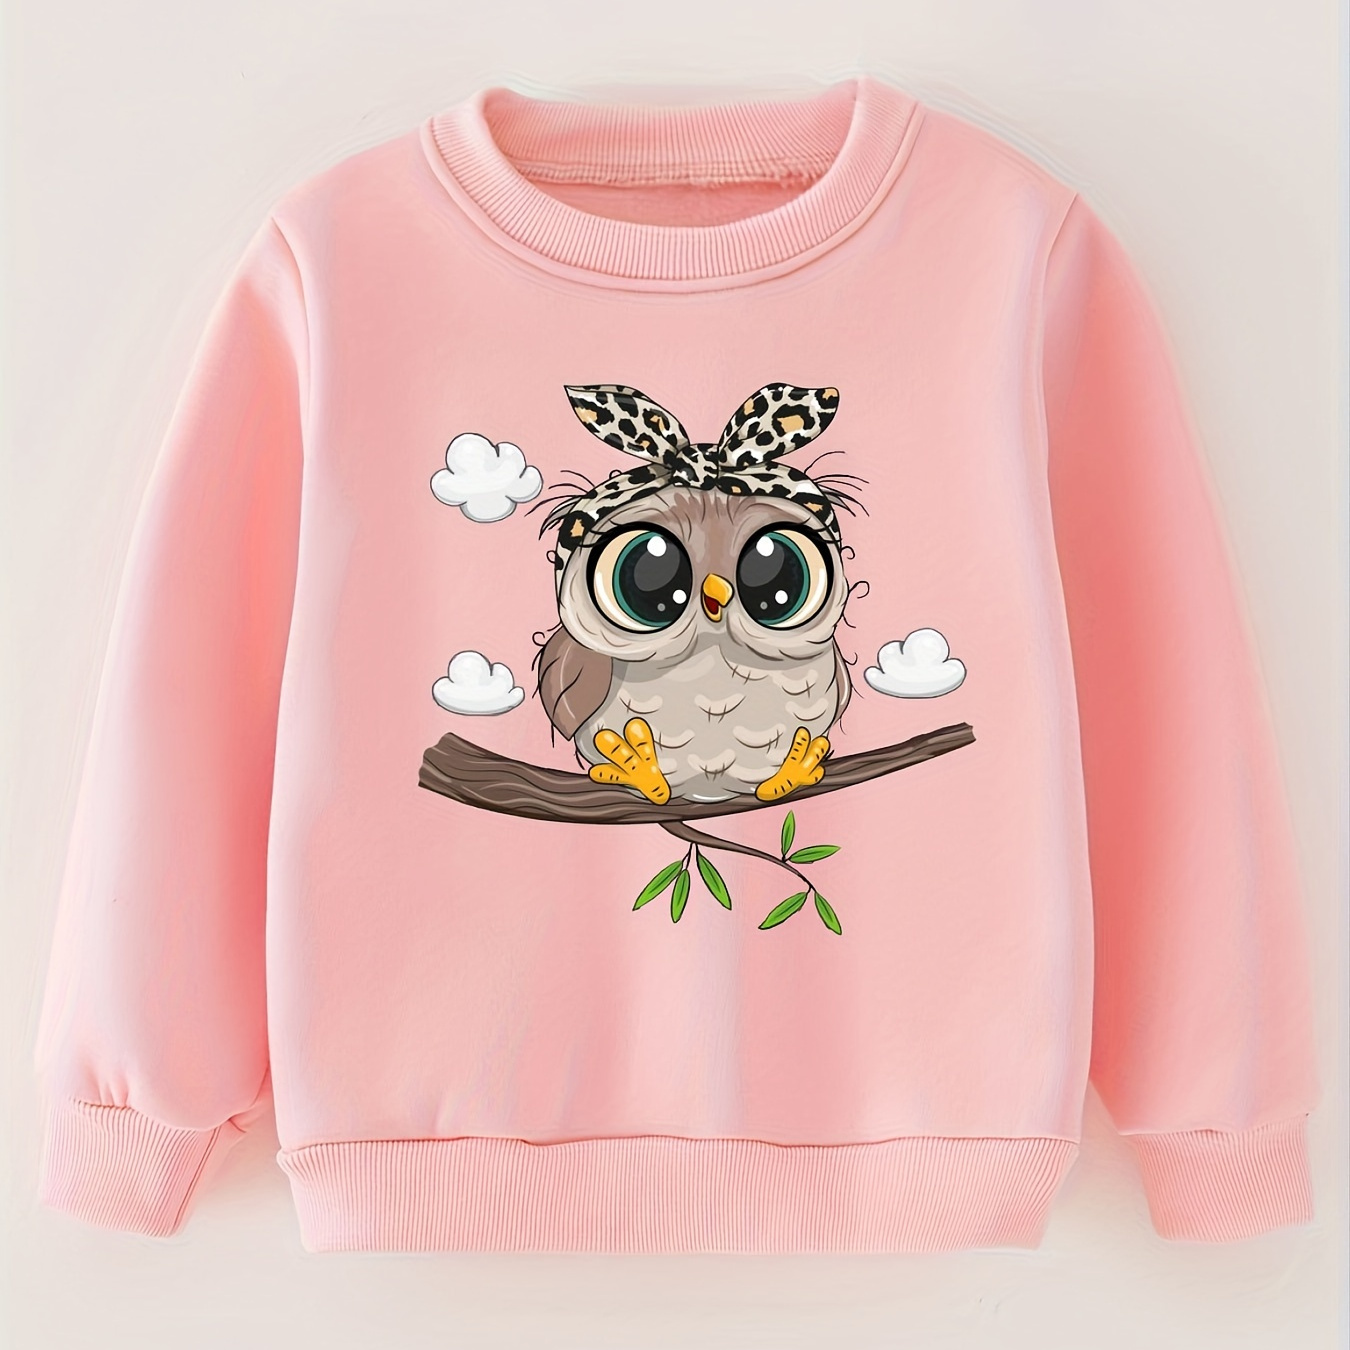 

Girls Cute Sweet Owl Print Crew Neck Sweatshirt For Sports Going Out, Children Girls Pullover Tops, Fall/spring Clothes